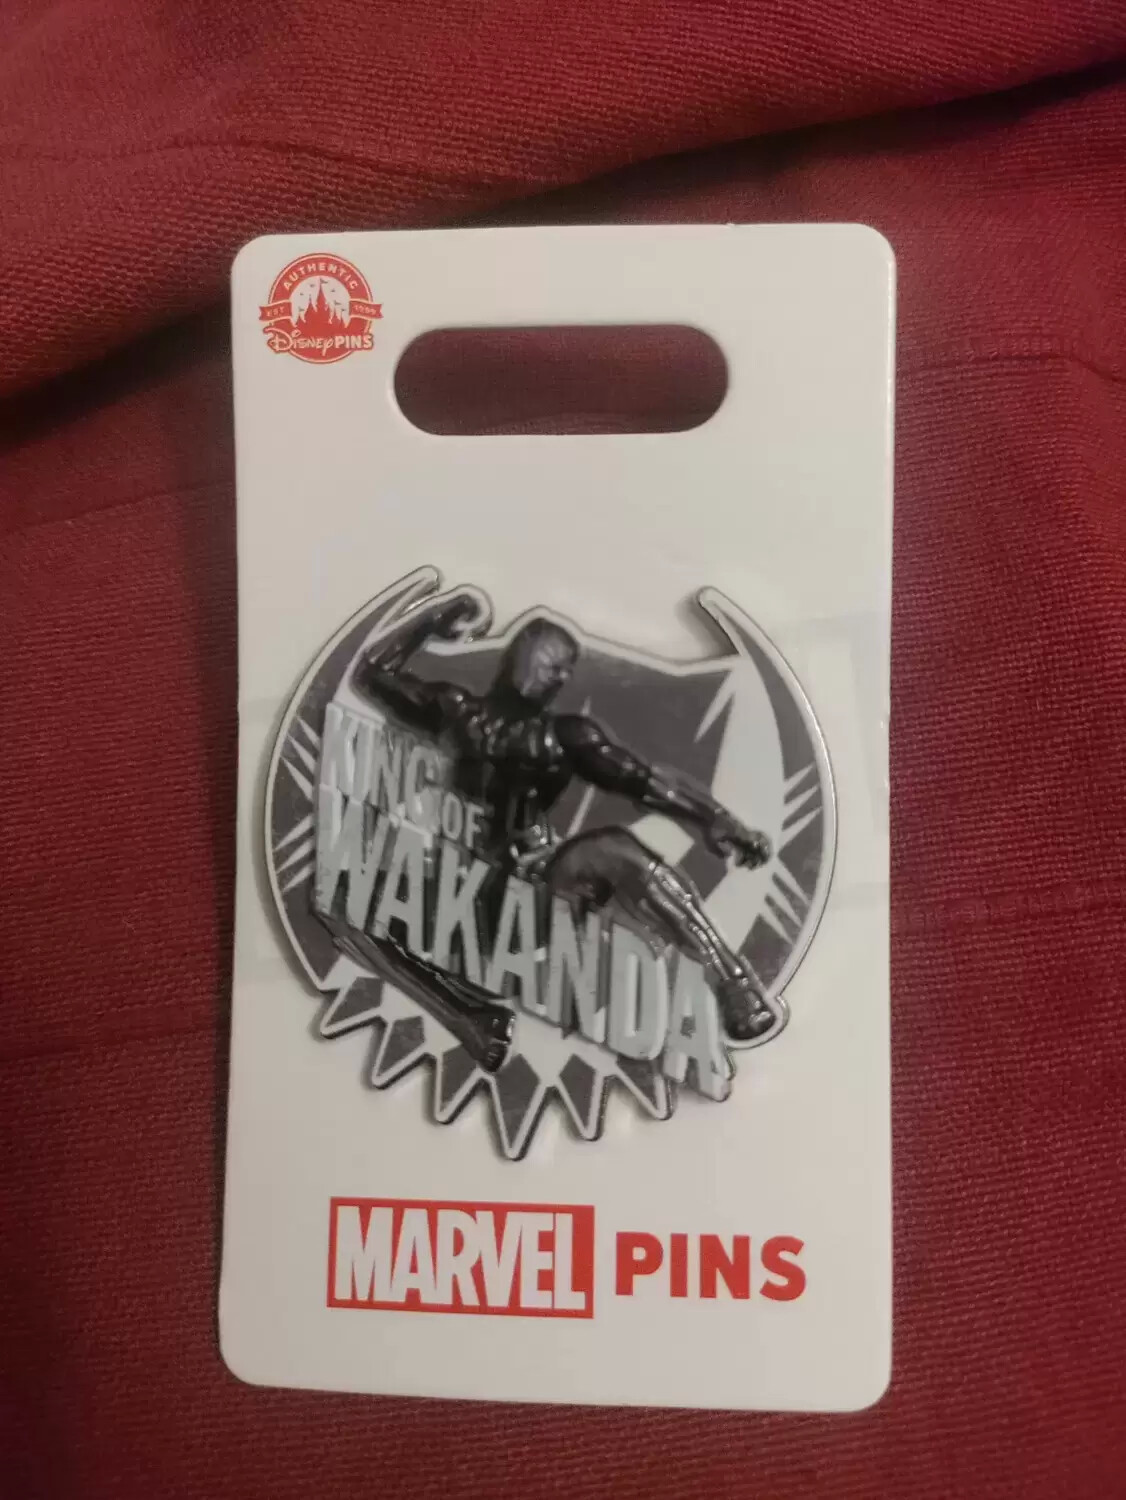 Disney - Pins Open Edition - Marvel Characters - Black Panther